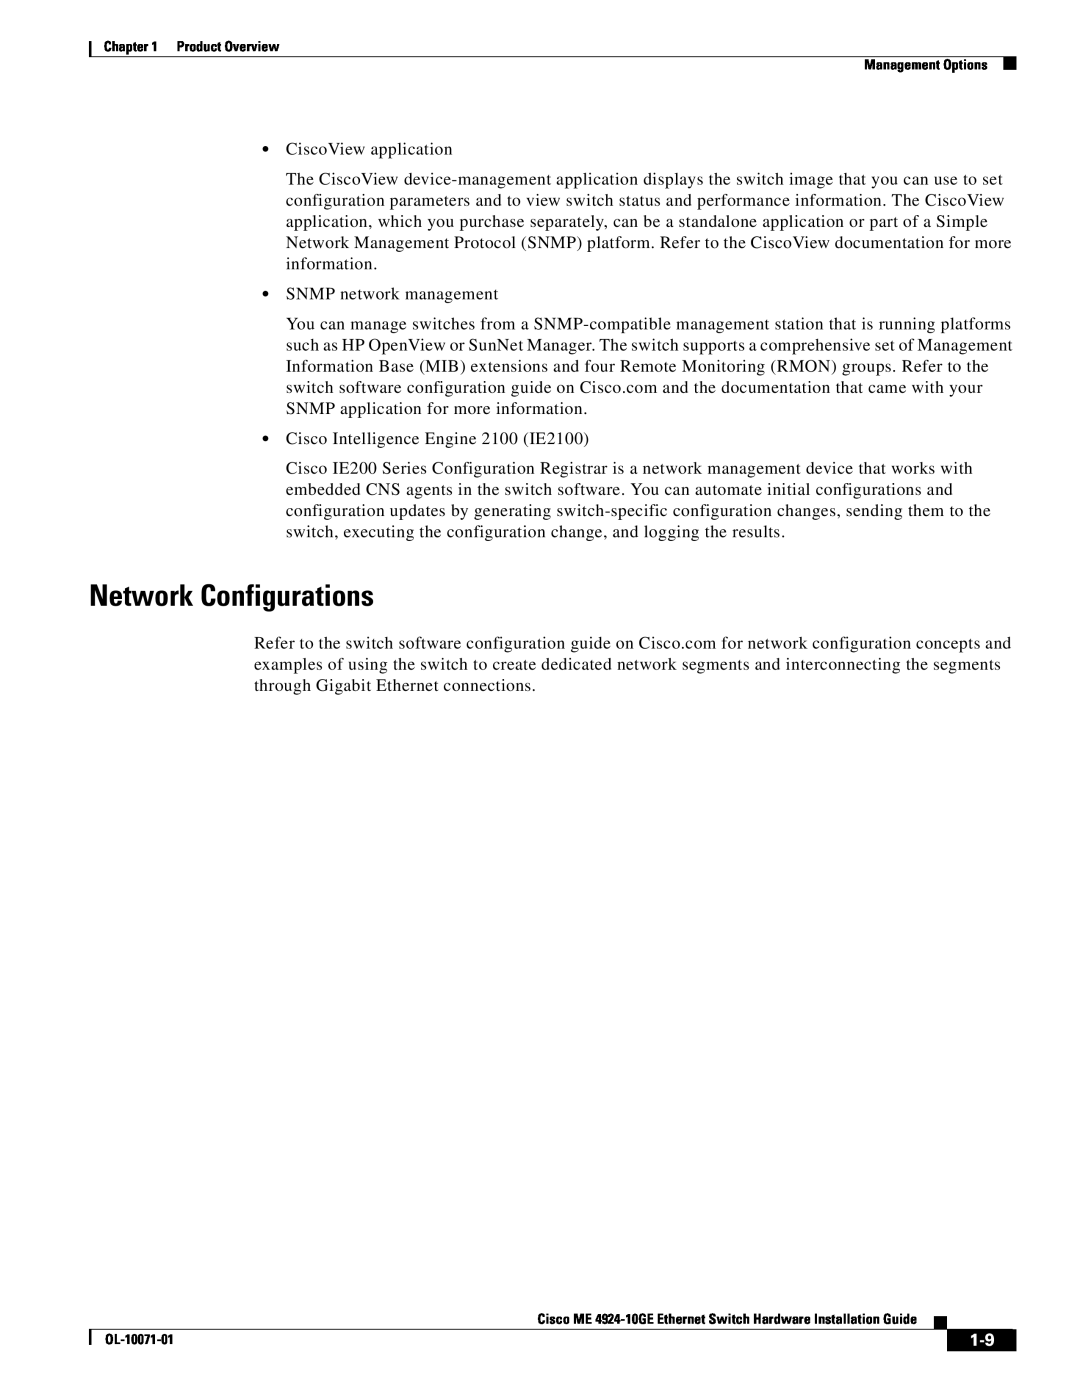 Cisco Systems ME 4924-10GE manual Network Configurations 